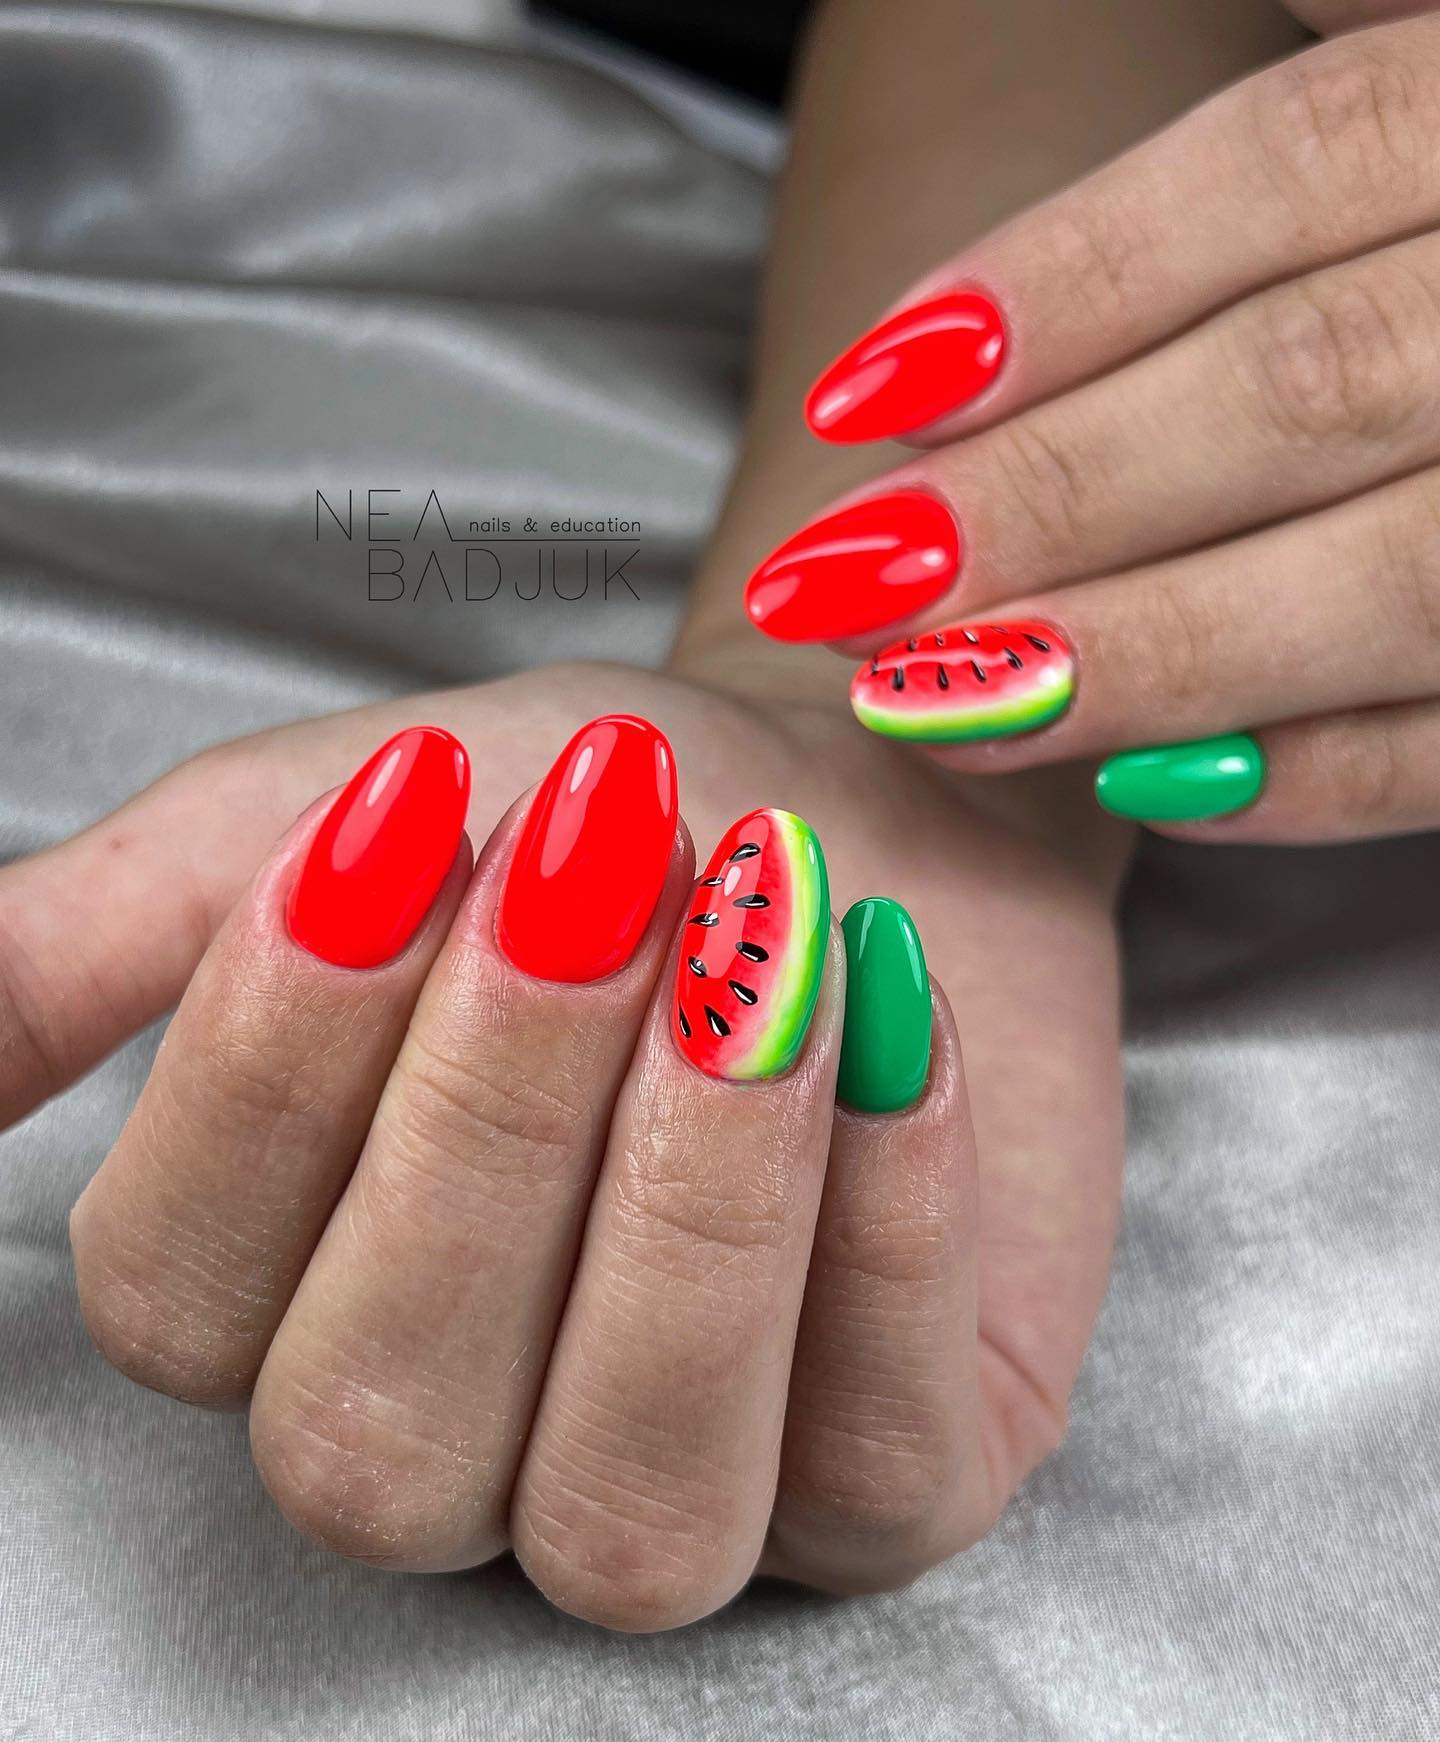 For summer, one of the best nail designs to apply on your oval mani is definitely watermelon nail art. It is a great way to show off your love of watermelon. Draw a watermelon for your accent nail and apply red and green nail polishes to other ones.